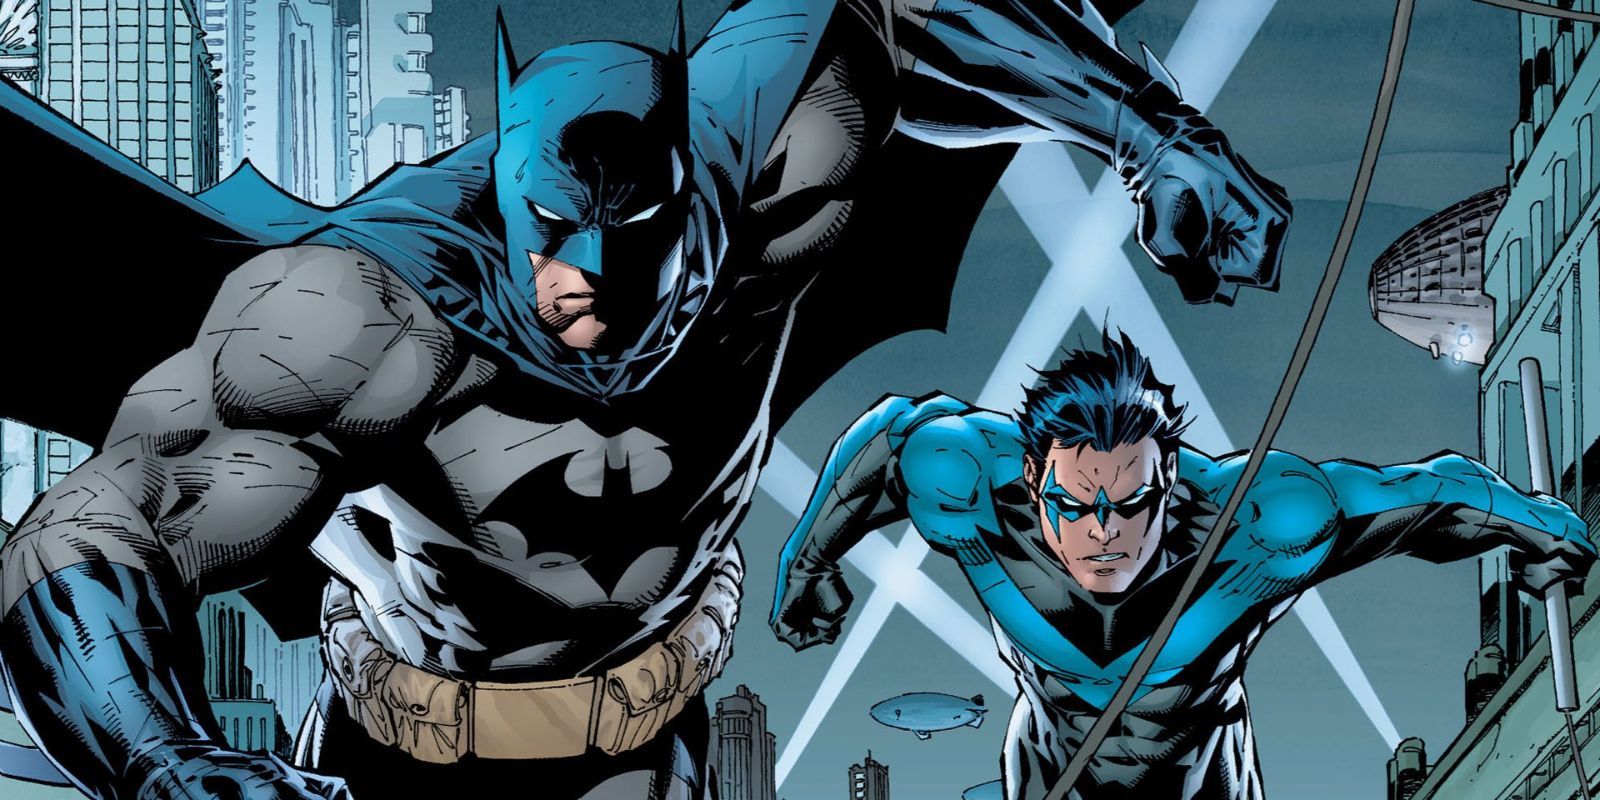 Jim Lee's art depicts Batman and Robin giving chase across Gotham's rooftops.